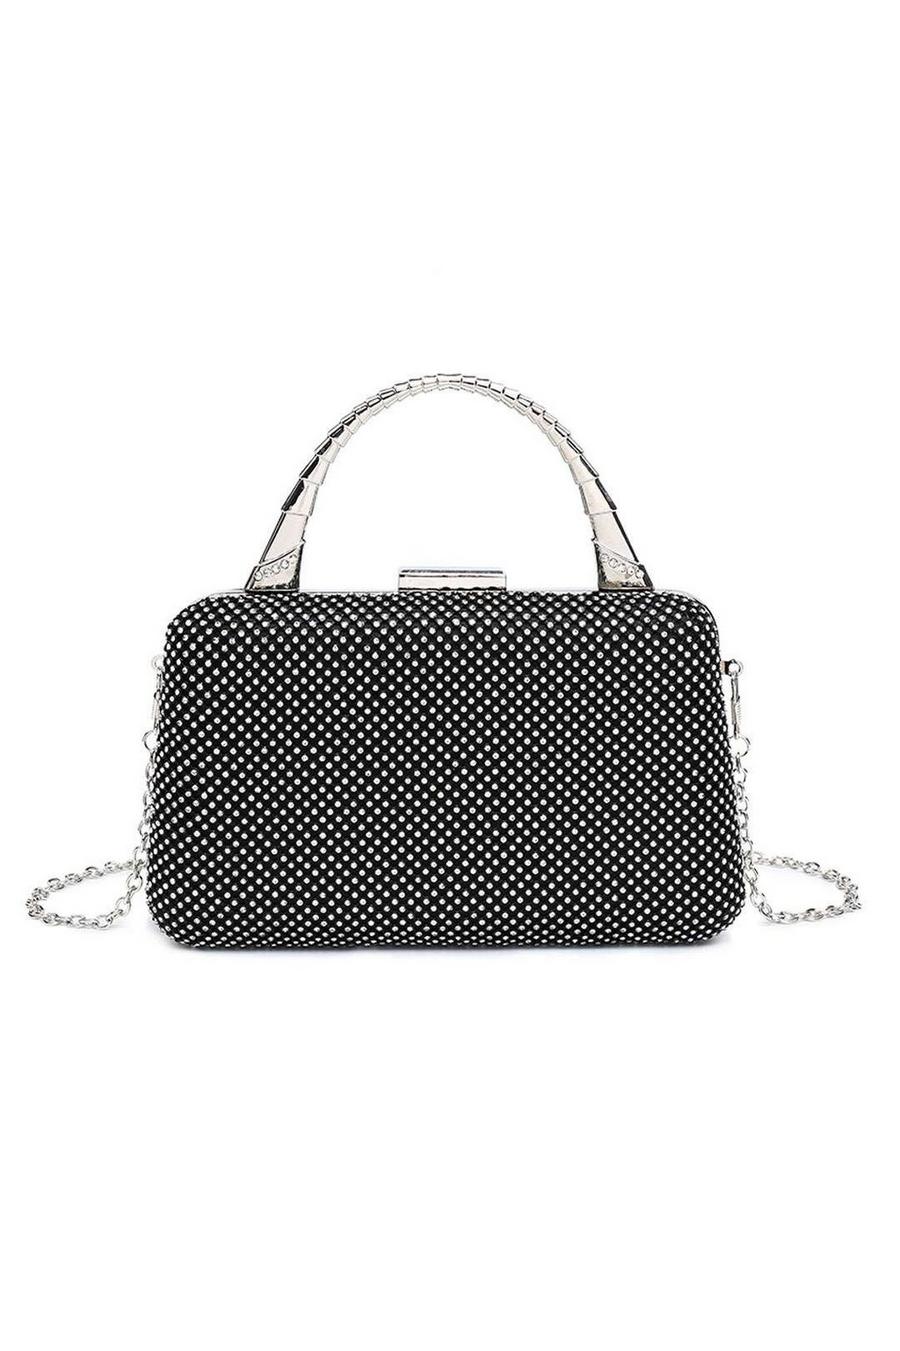 Black Shiny Evening Clutch Bag With Handle & Chain Strap